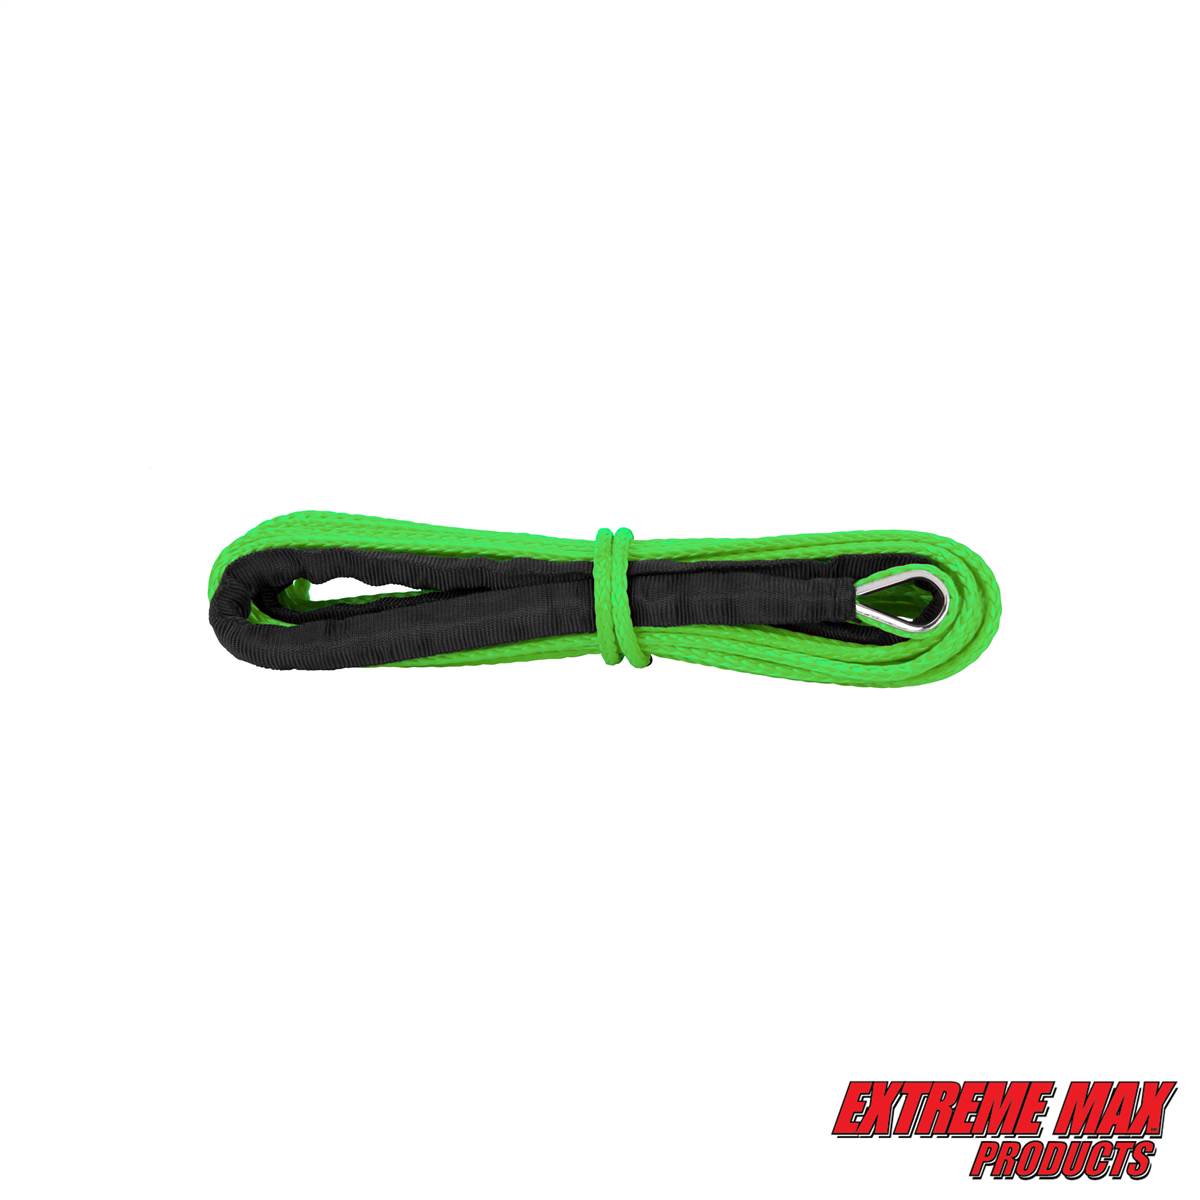 UTV Winch Rope Extreme Max "The Devil's Hair" Synthetic ATV Lime Green 